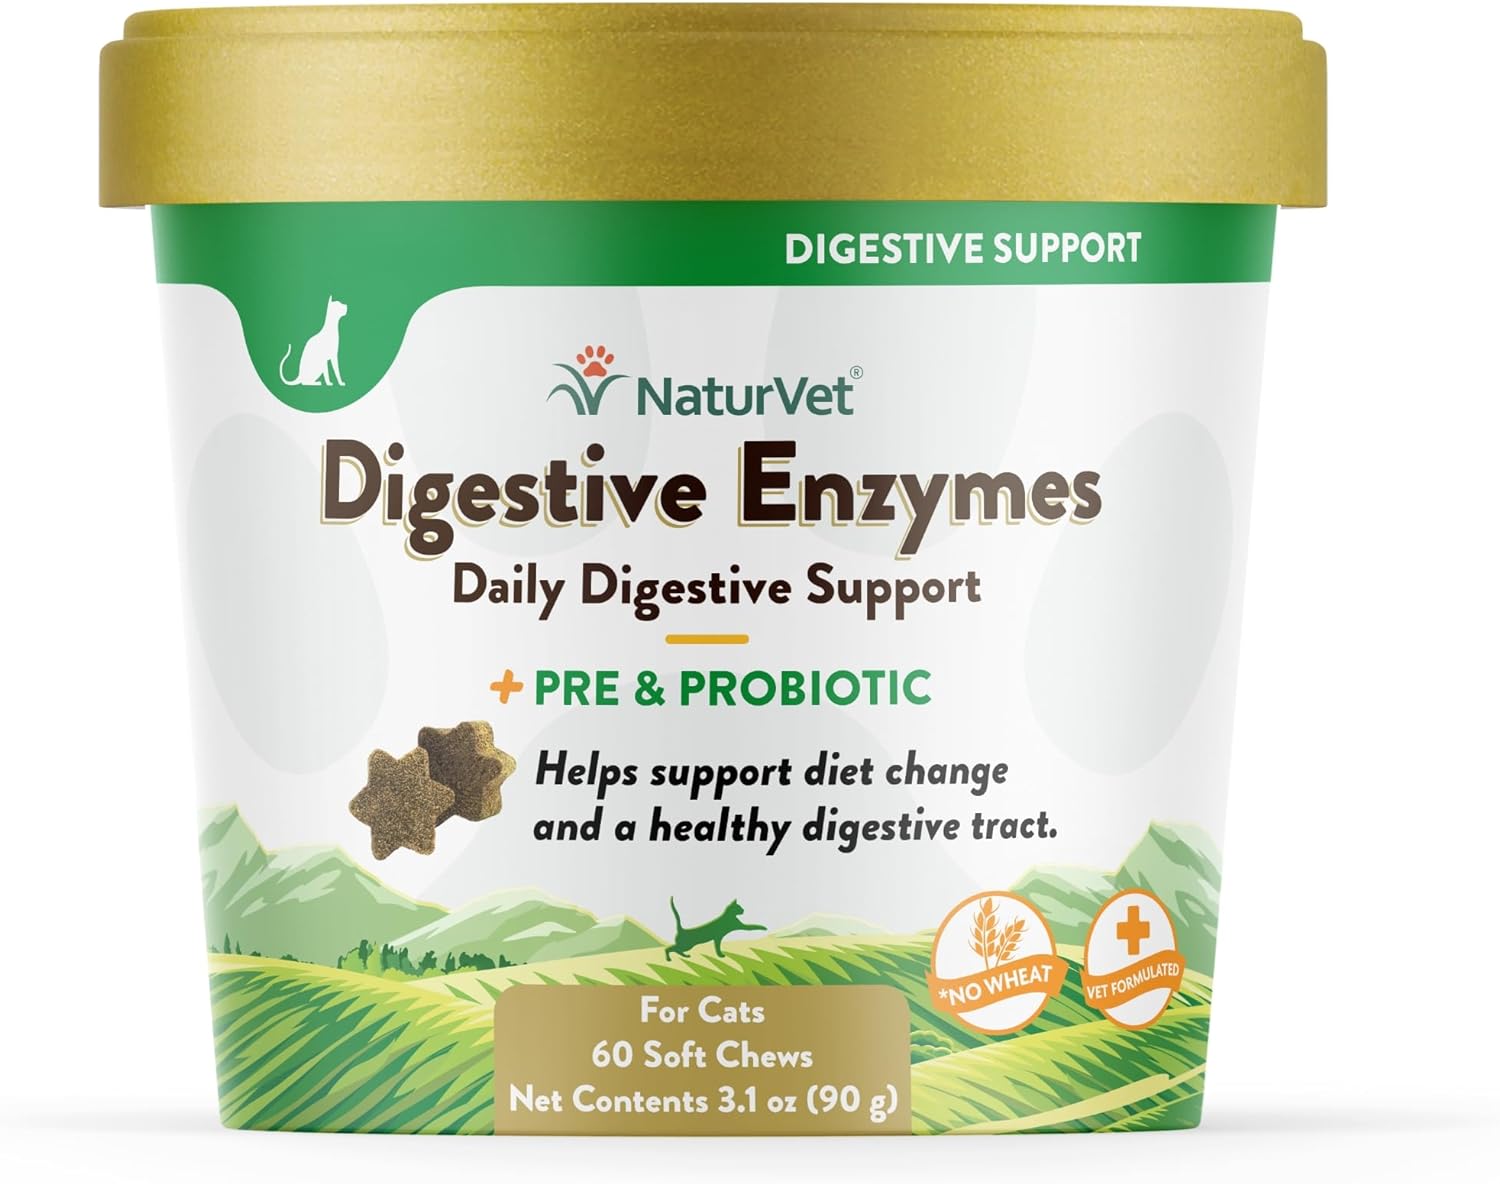 NaturVet – Digestive Enzymes for Cats Plus Probiotics – 60 Soft Chews – Helps Support Diet Change & A Healthy Digestive Tract – Aids in The Absorption of Vitamins & Minerals – 30 Day Supply